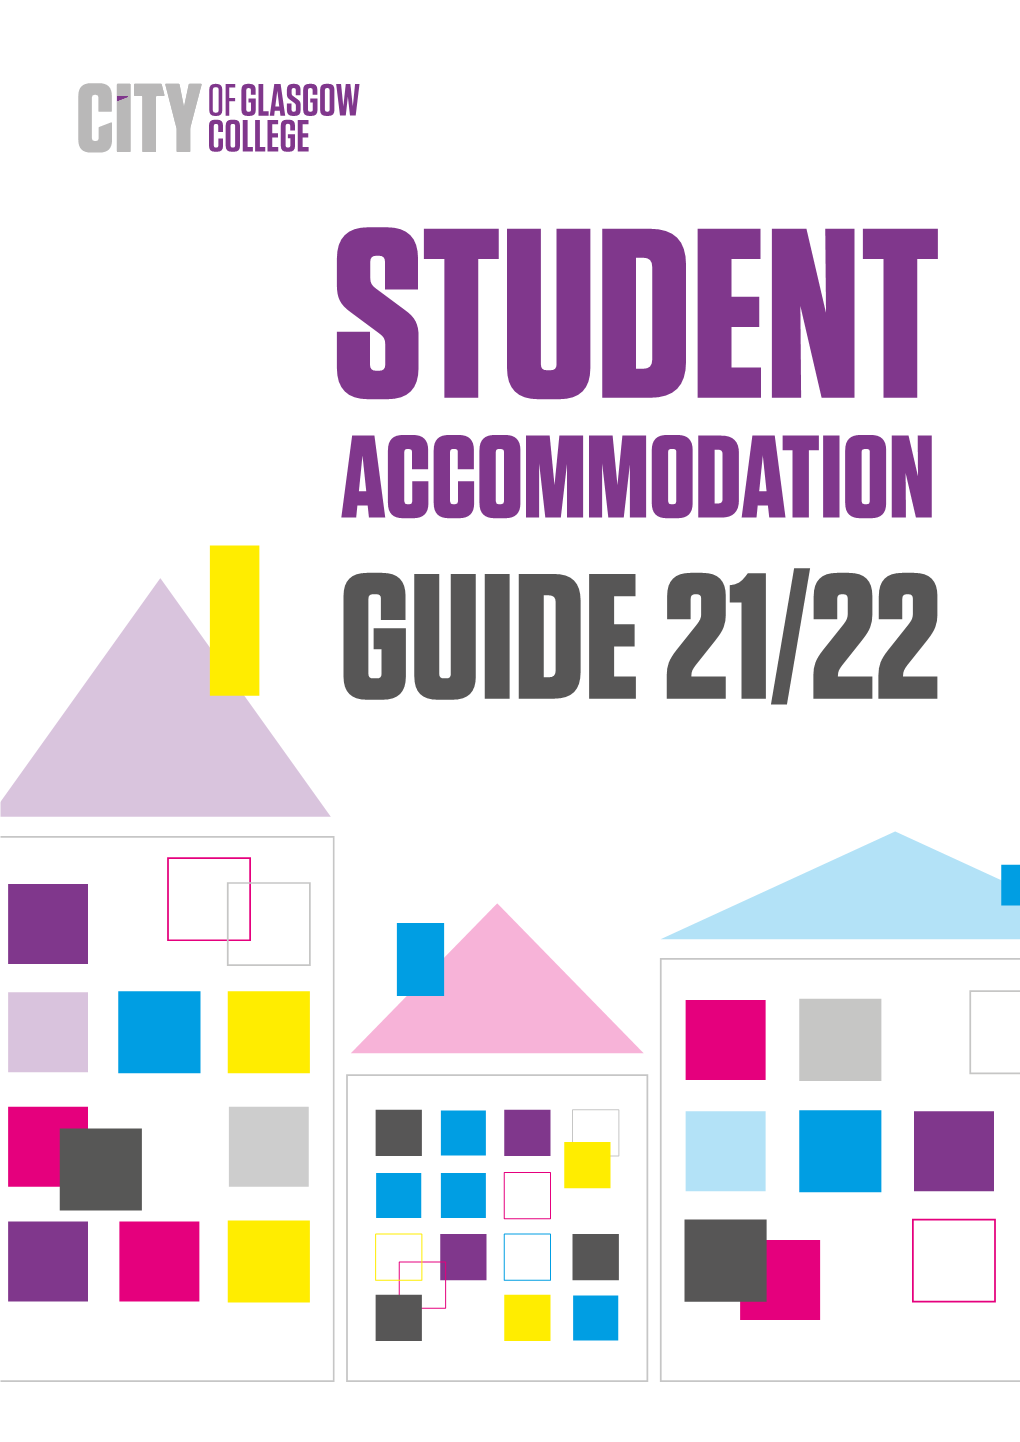 STUDENT ACCOMMODATION GUIDE 21/22 Contents